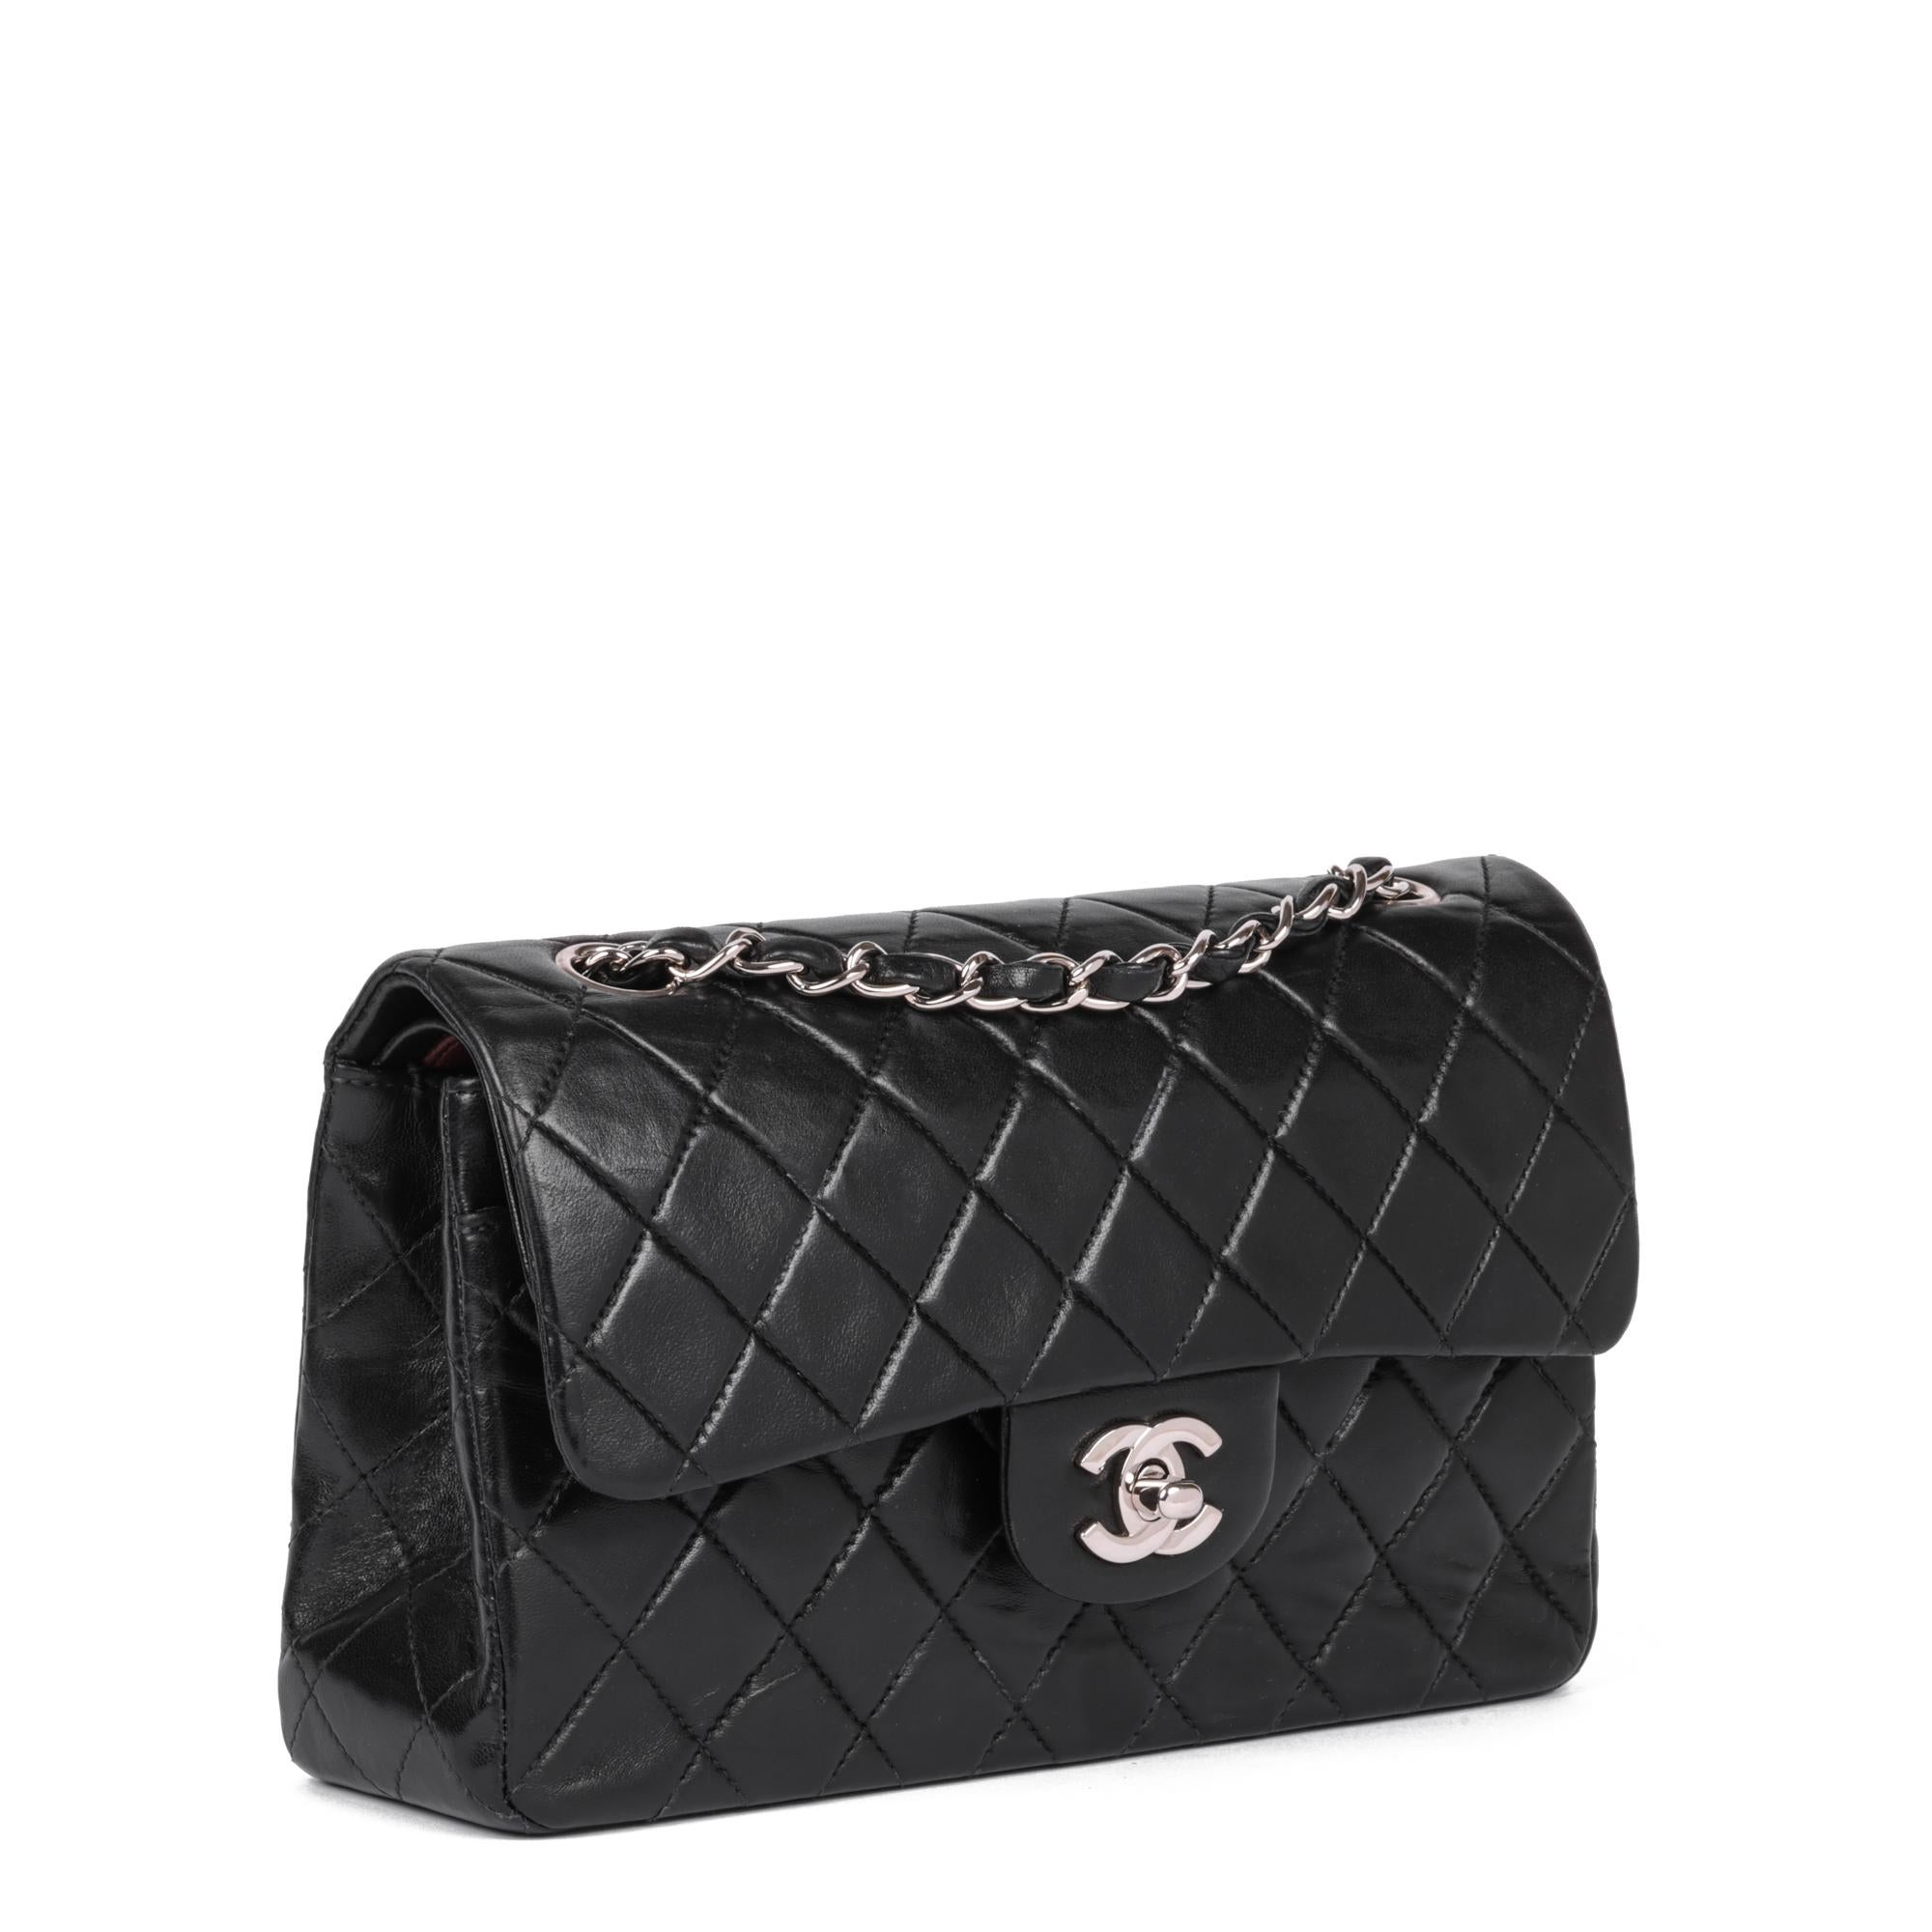 CHANEL
Black Quilted Lambskin Vintage Small Classic Double Flap Bag

Serial Number: 6688783
Age (Circa): 2001
Accompanied By: Chanel Dust Bag, Authenticity Card, Care Booklet
Authenticity Details: Authenticity Card, Serial Sticker (Made in